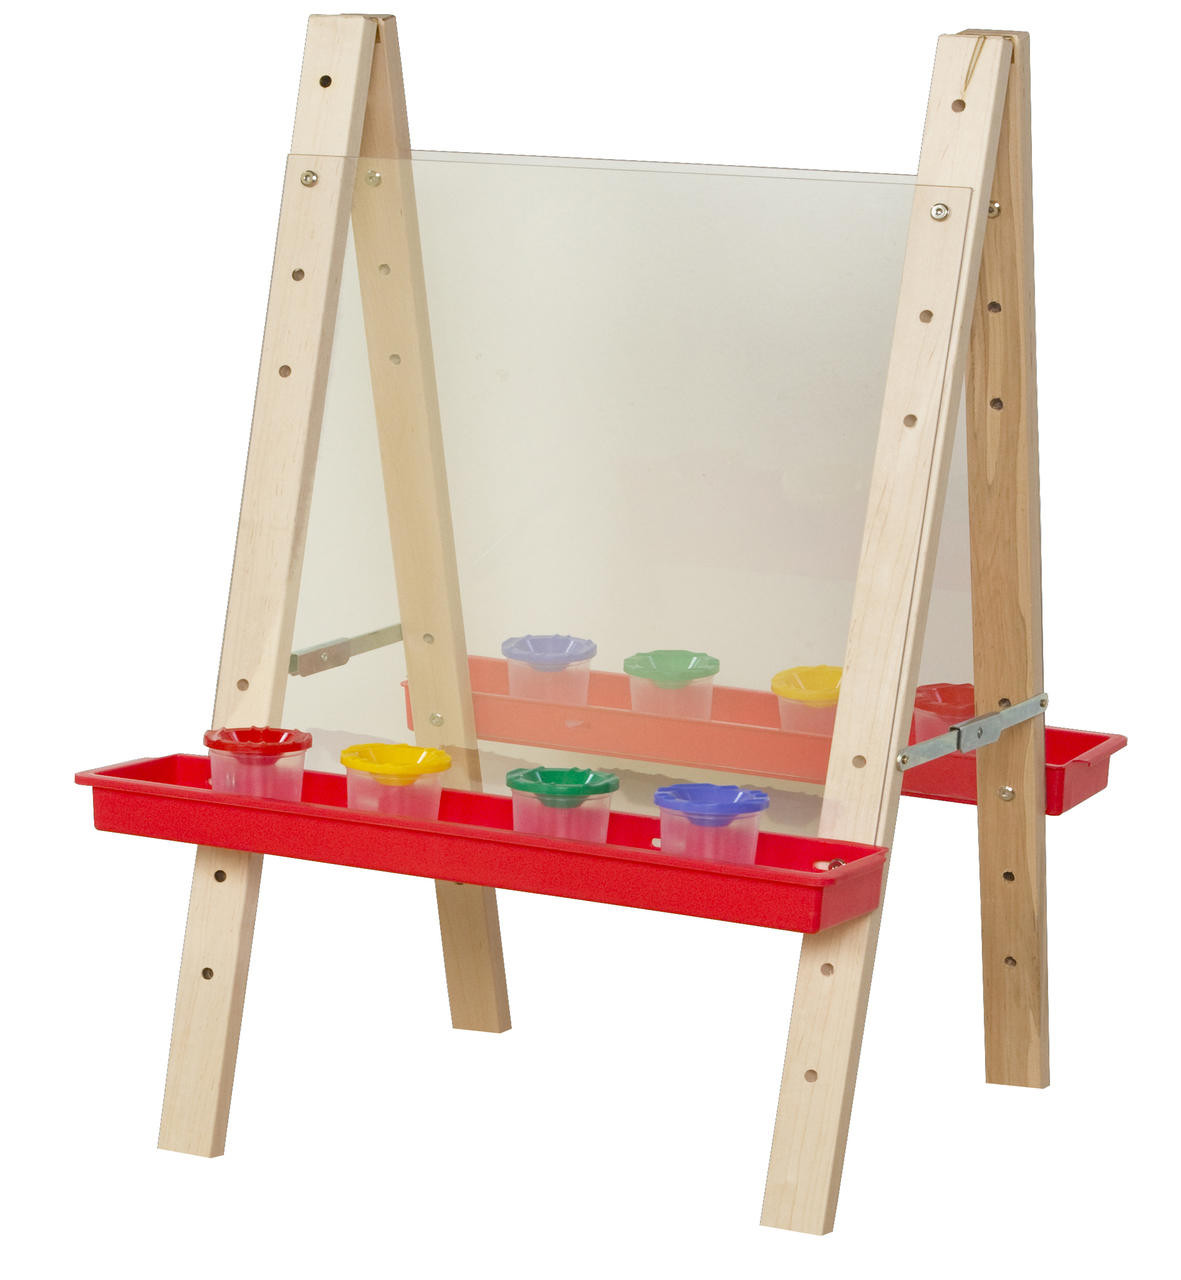 Acrylic Easel - Acrylic Easel Stand, Retail Resource, Retail Resource